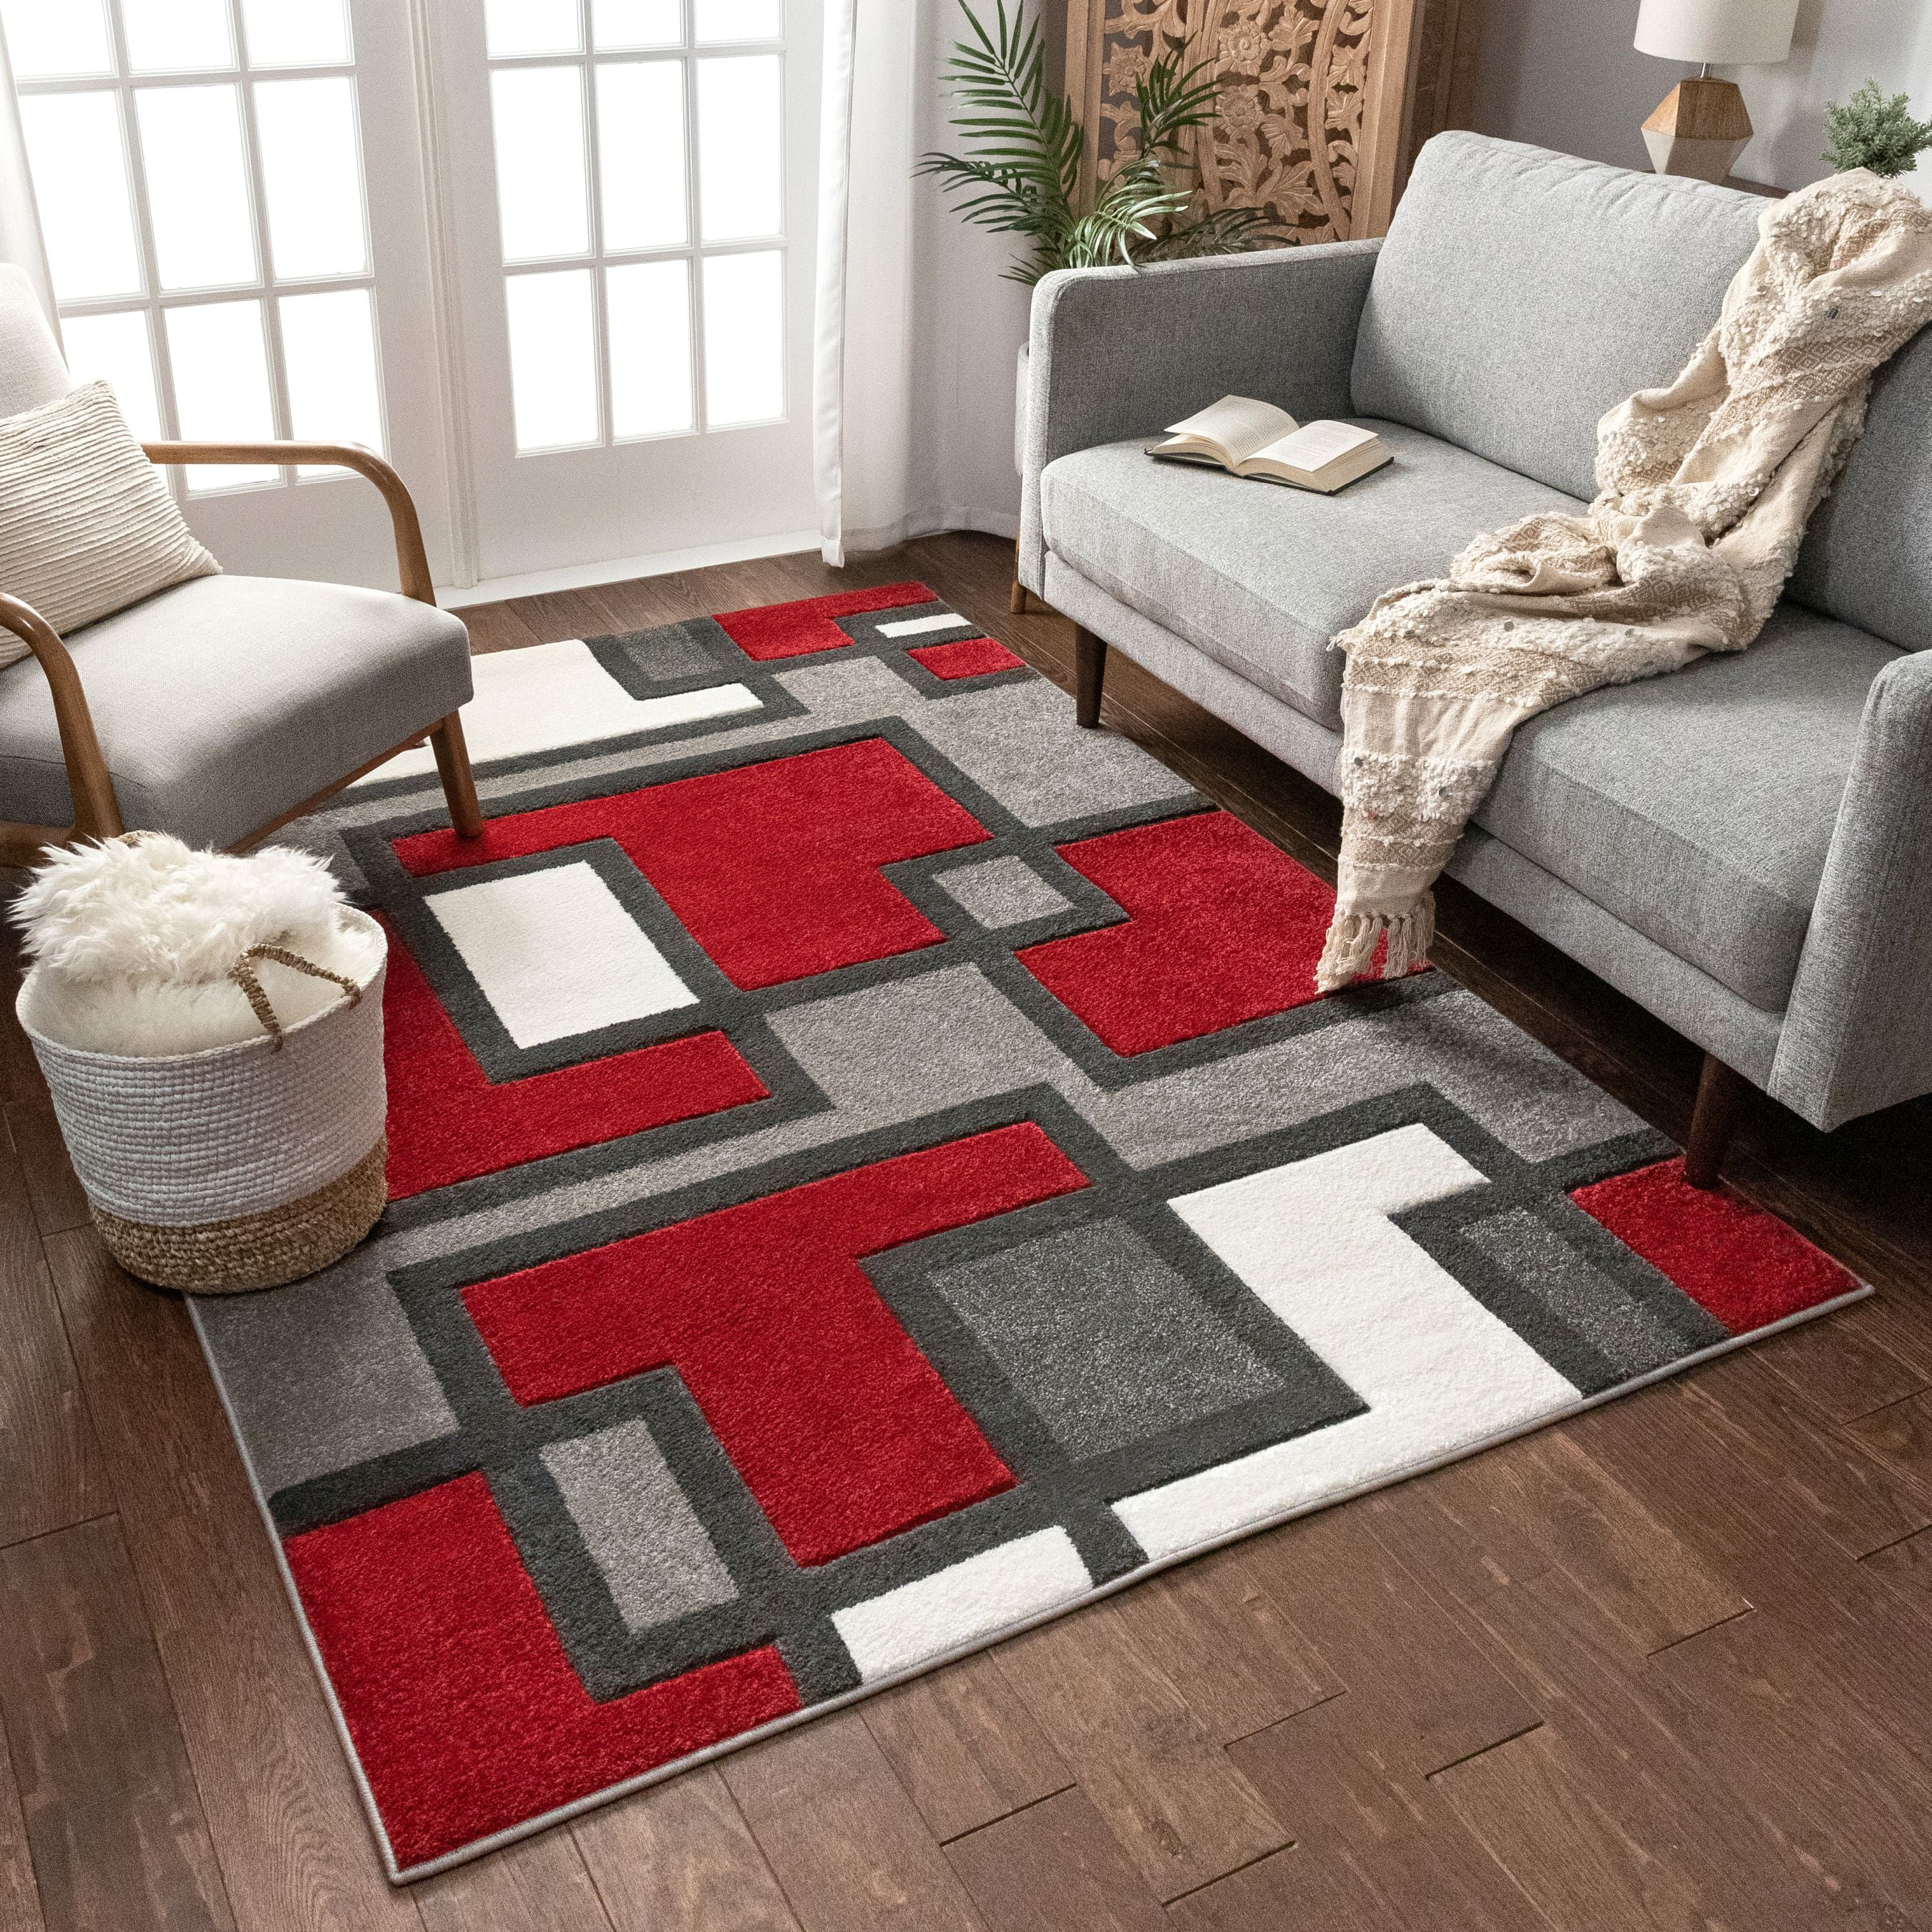 Well Woven Ruby Imagination Squares Mid, Modern Red Rug